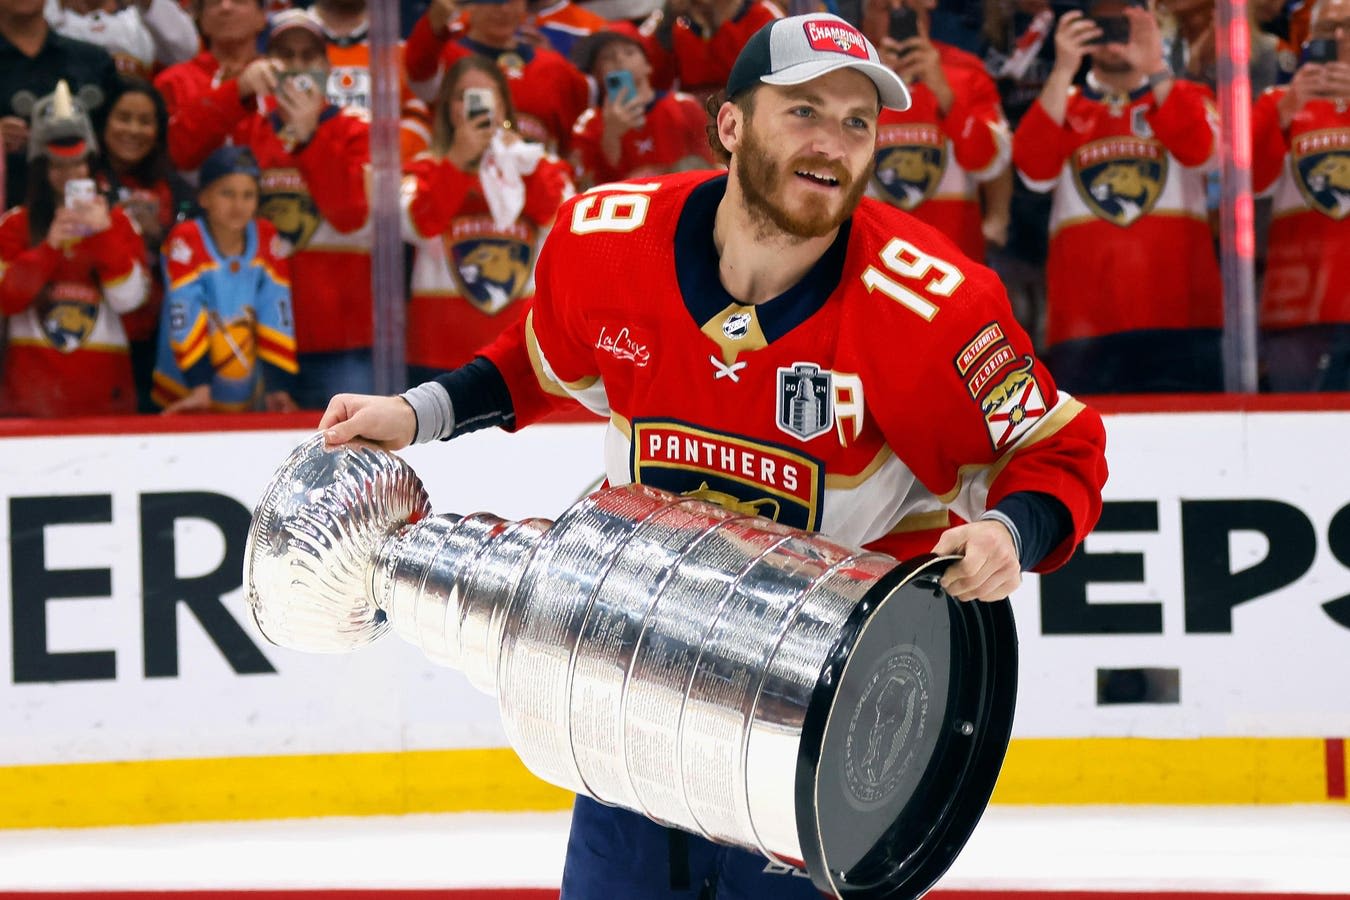 Matthew Tkachuk On Florida Panthers’ Epic Game 7 Stanley Cup Finals Win And Why They Never Lost Confidence